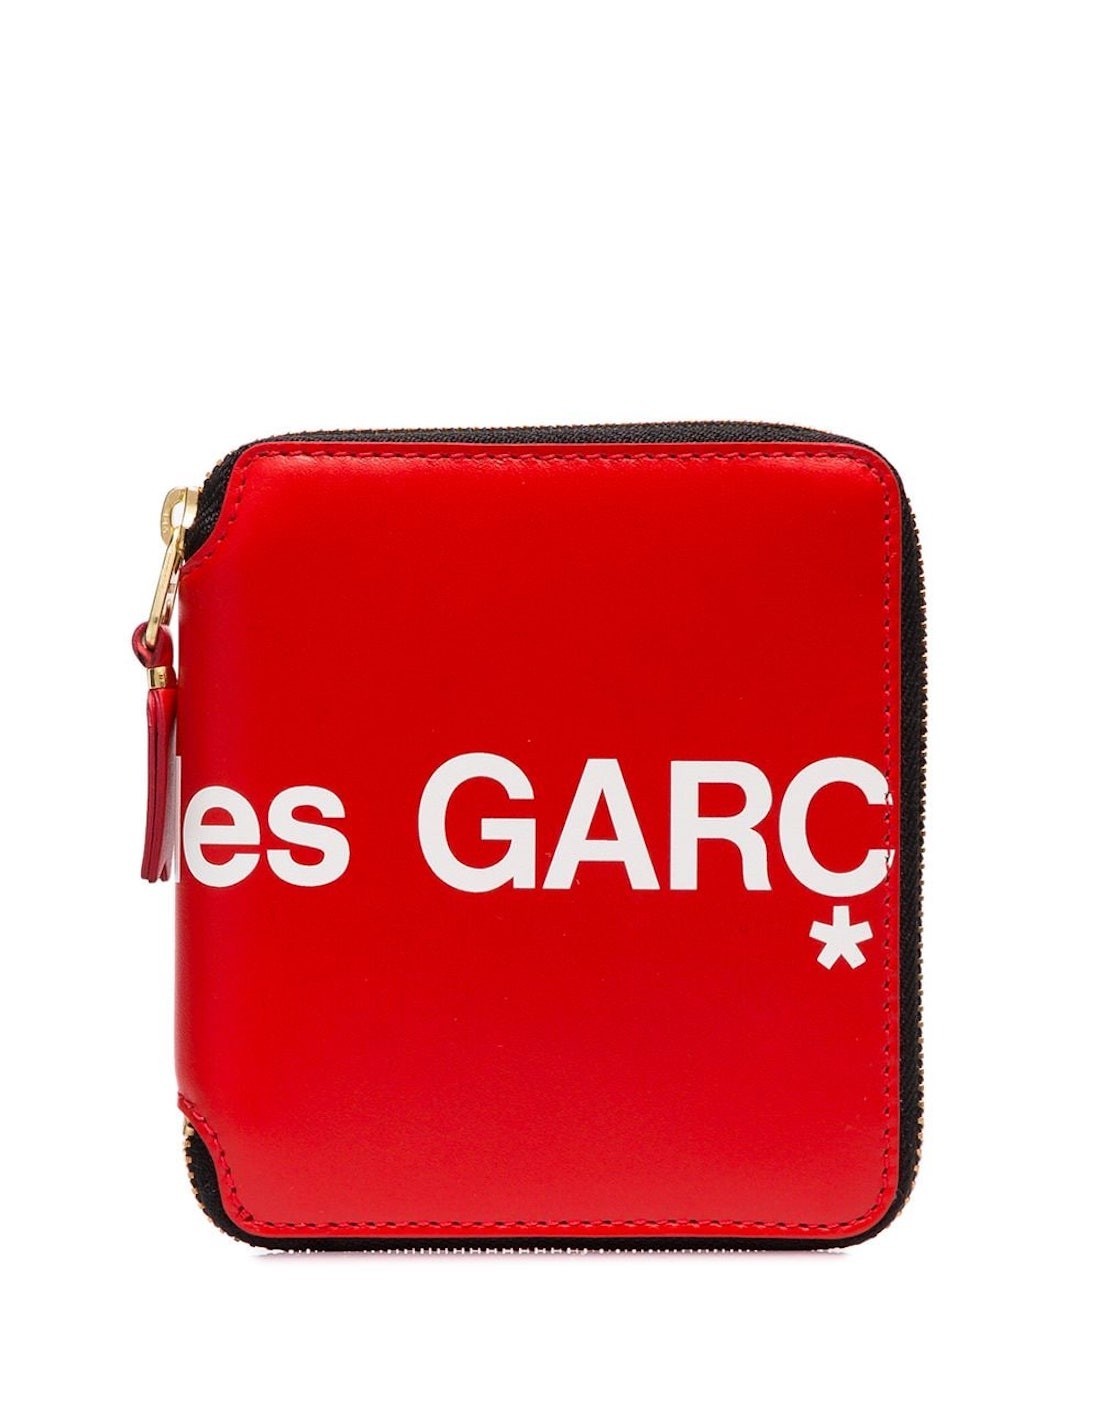 COMME DES GARCONS WALLET zipped red wallet with logo, unisex